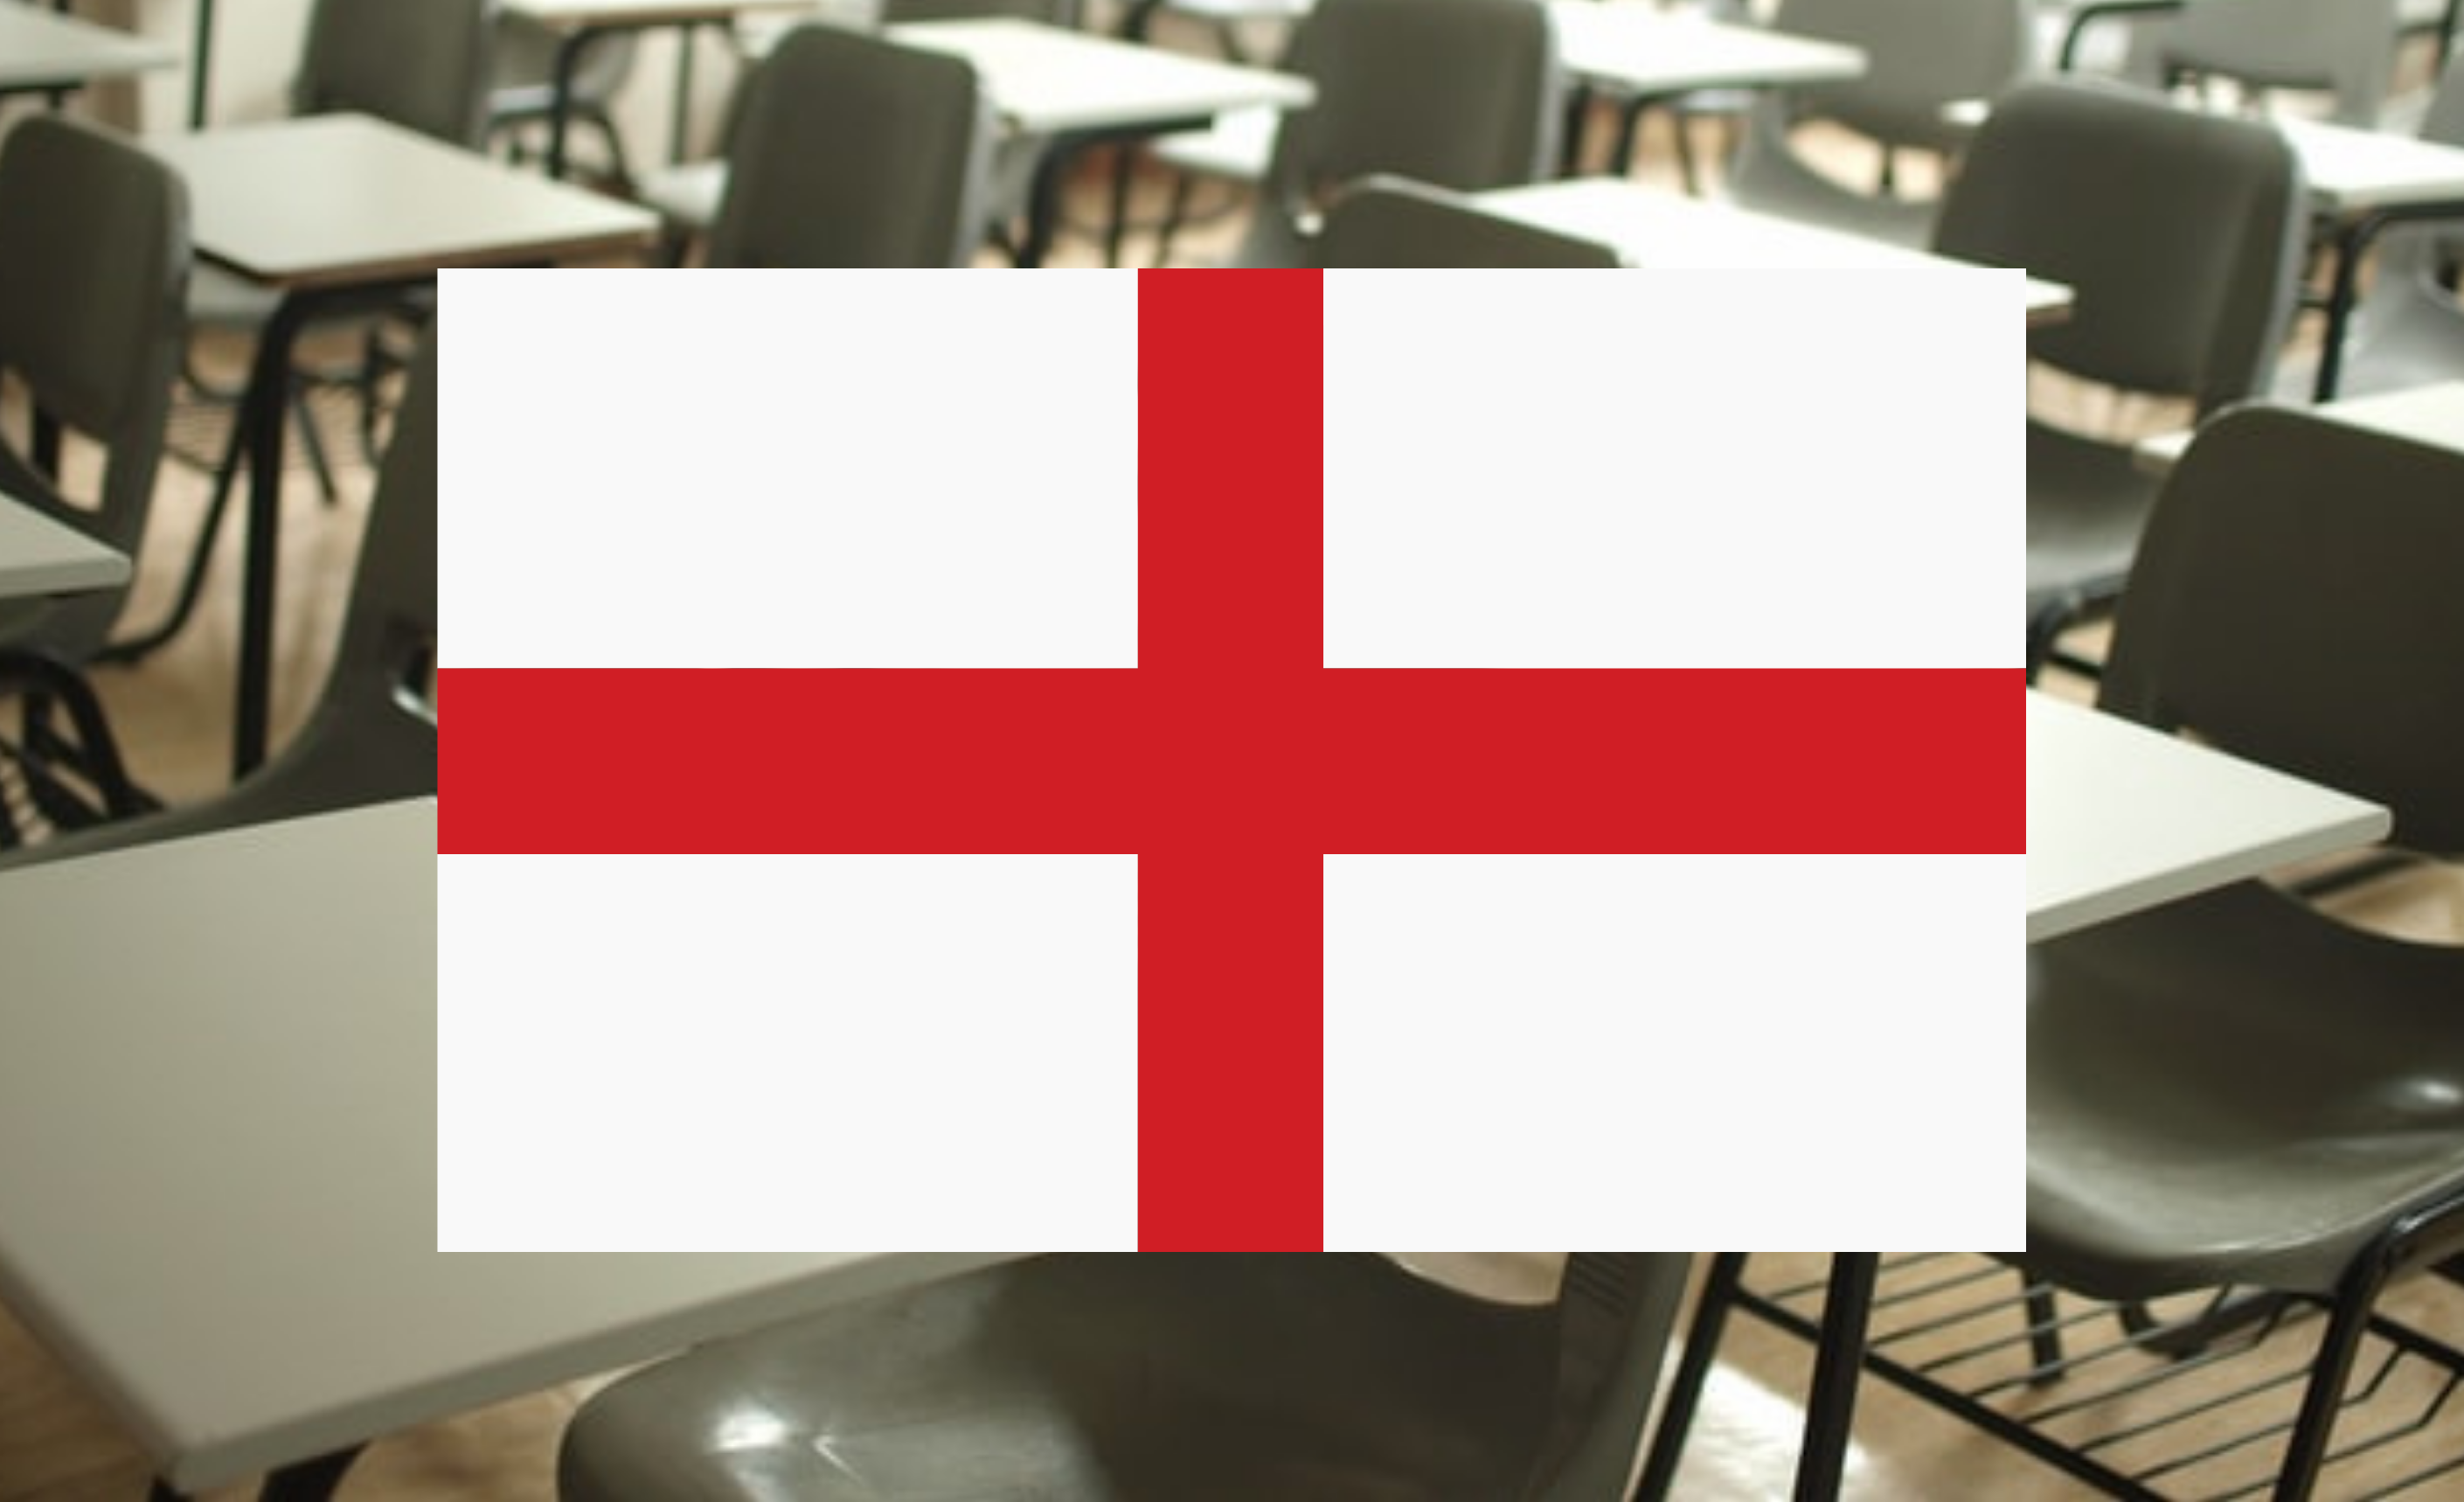 NEWS | A number of schools in Herefordshire will be opening at 10:30am on Monday to allow children to watch Euro 2020 final